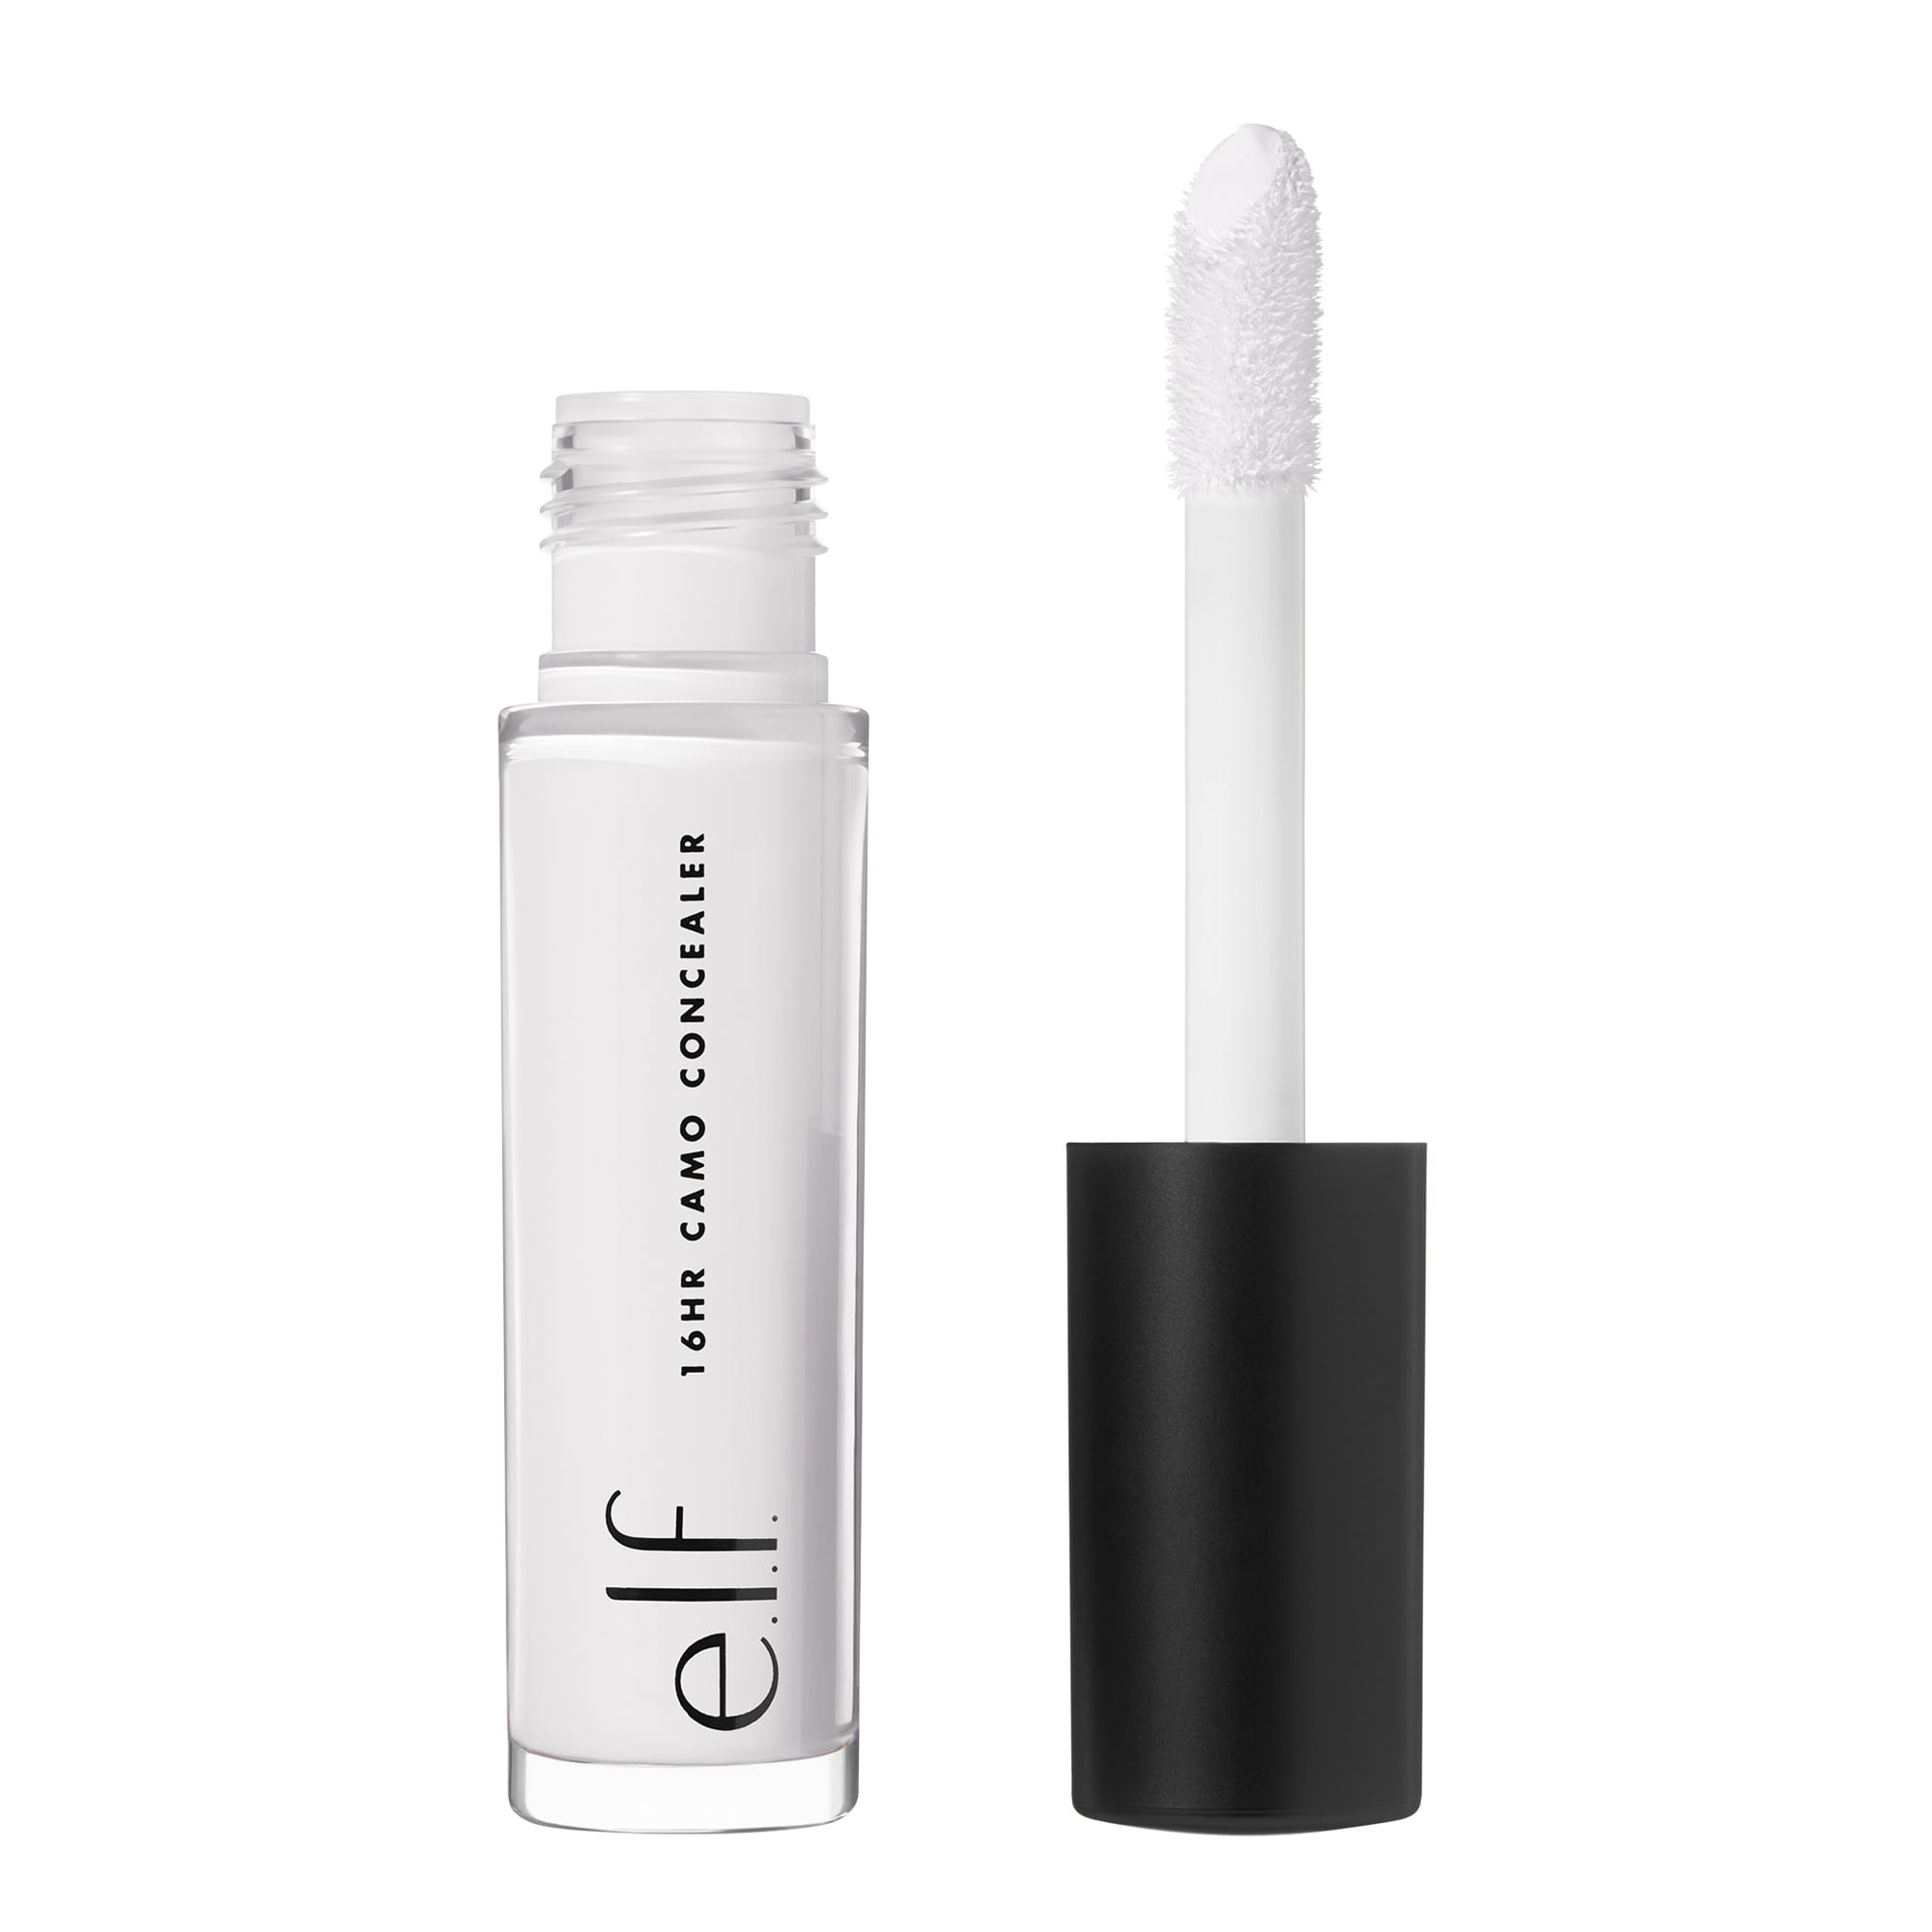  White Concealer Concealer White Concealer Concealer White Skin  Tone Concealer Moisturizing And Breathable Breathable Texture 20ml The  Better Skin : Beauty & Personal Care